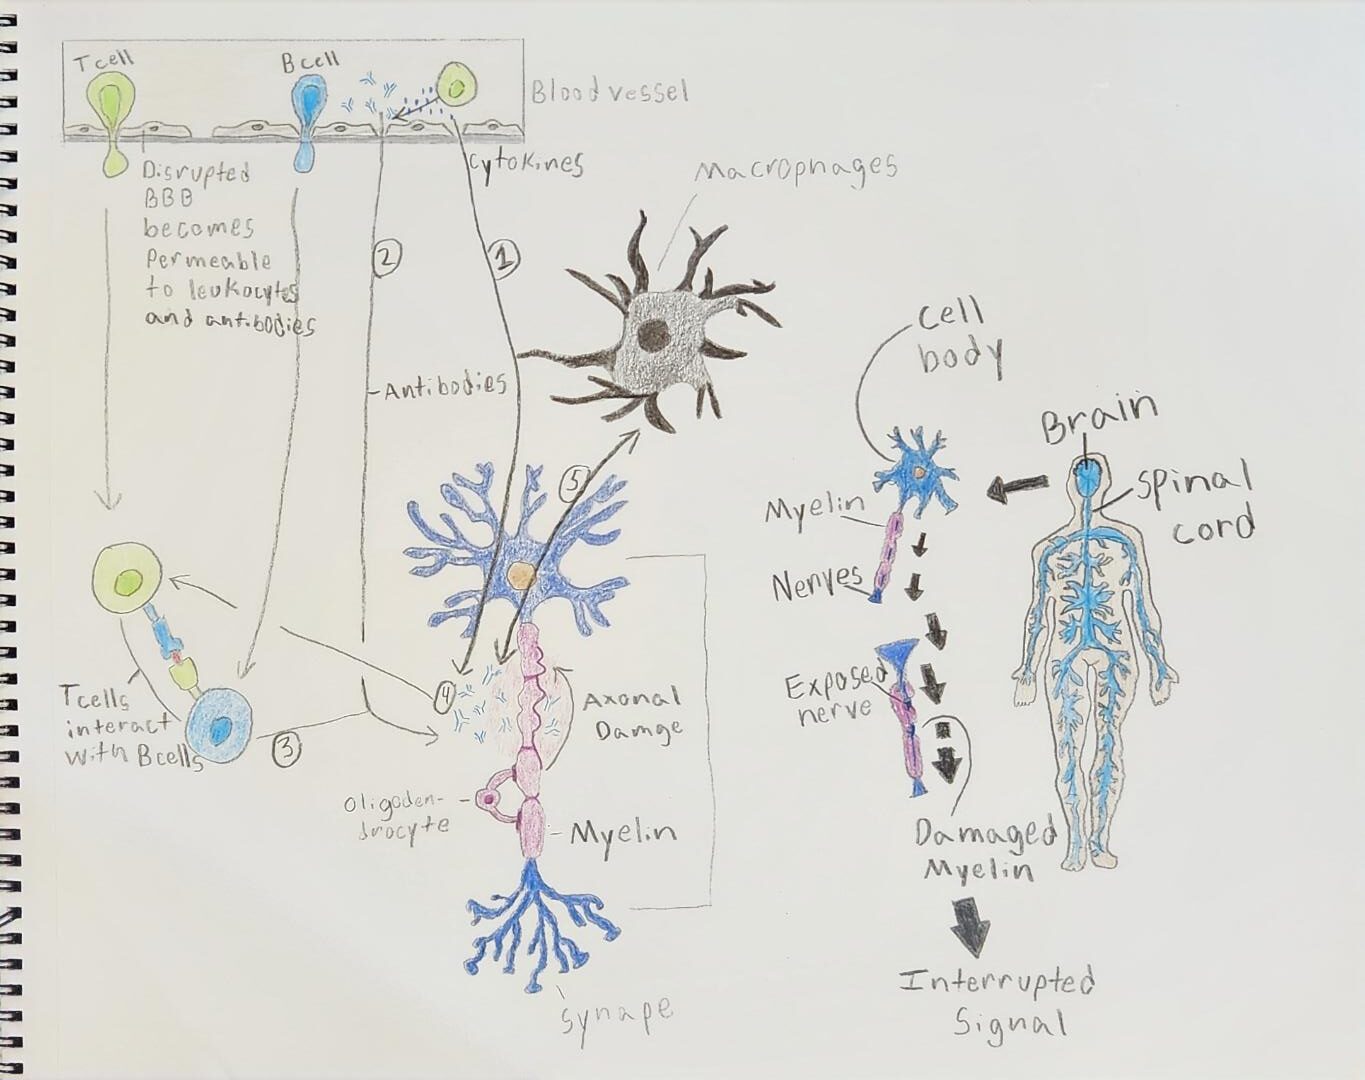 Role of cells and antibodies in Multiple Sclerosis.